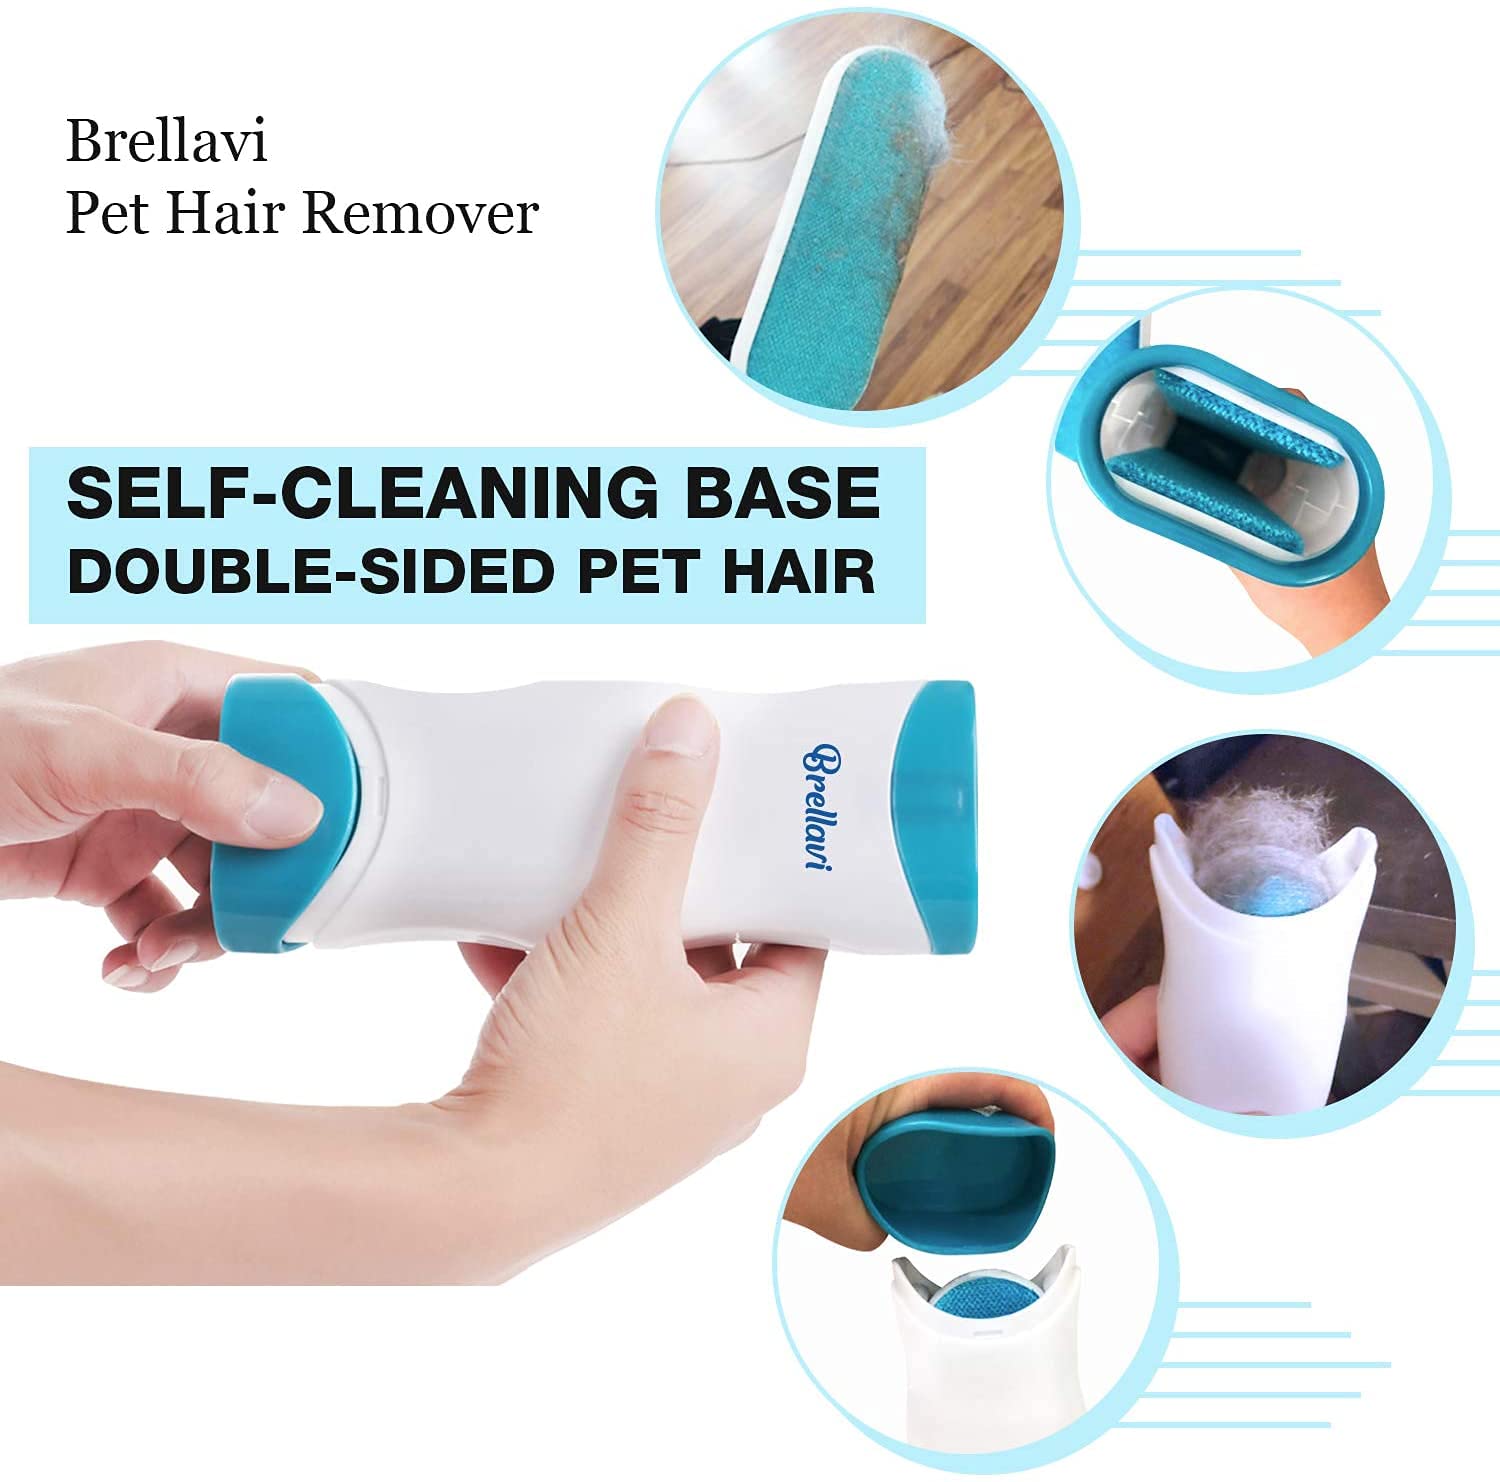 Mua Pet Hair Remover -Dog Hair Remover For Clothes-Better than Lint Rollers  for Pet Hair, Dog Hair Remover- Lint Remover Brush - Remove Cat and Dog Hair,  Lint from Clothing, Couch, Furniture,